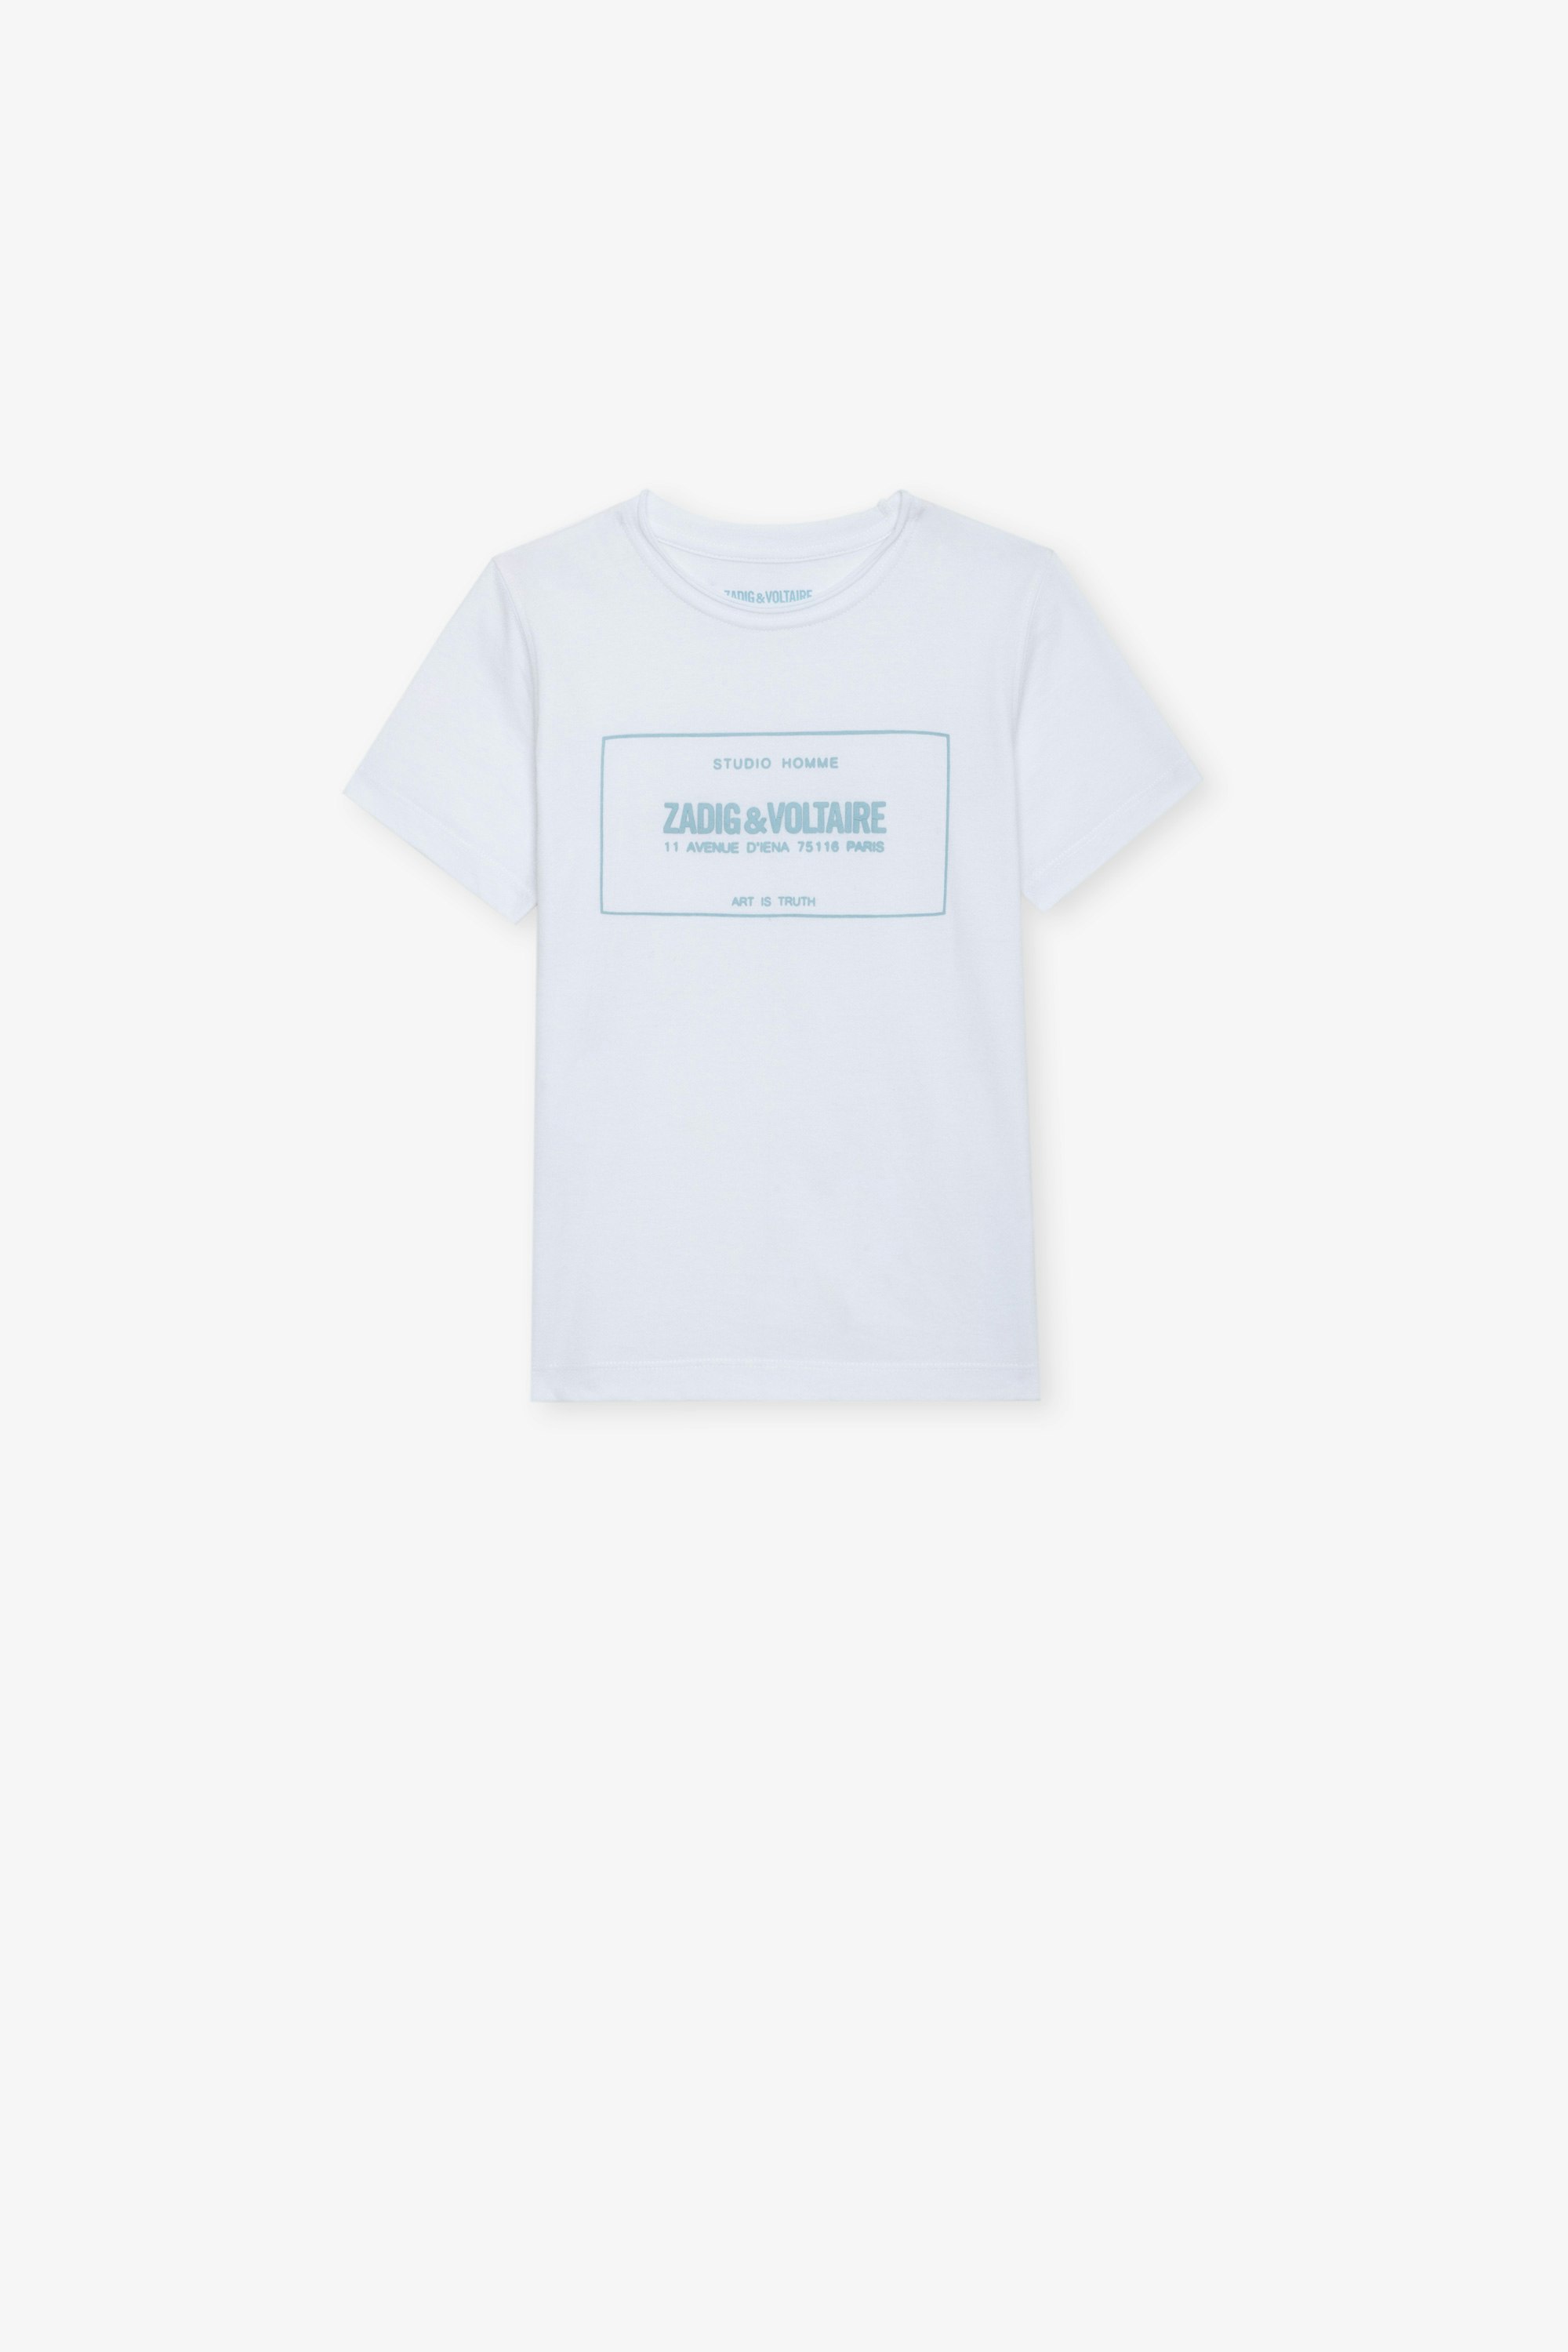 Toby Boys’ T-shirt - Boys’ white short-sleeved cotton jersey T-shirt with insignia.